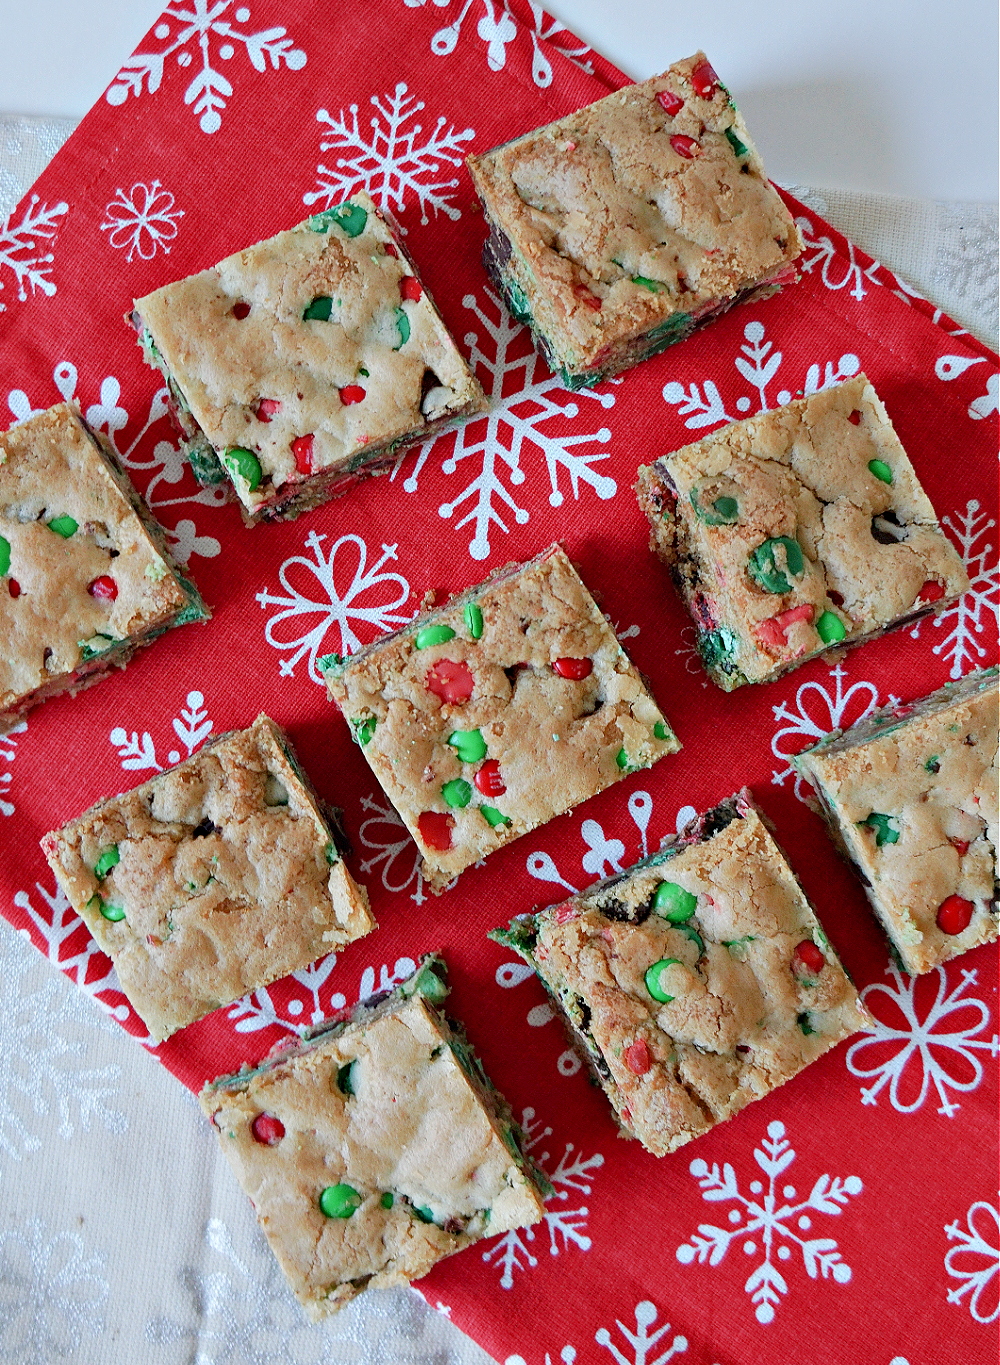 M&Ms Christmas Cookie Bars on a red napkin with red and green M&M candies